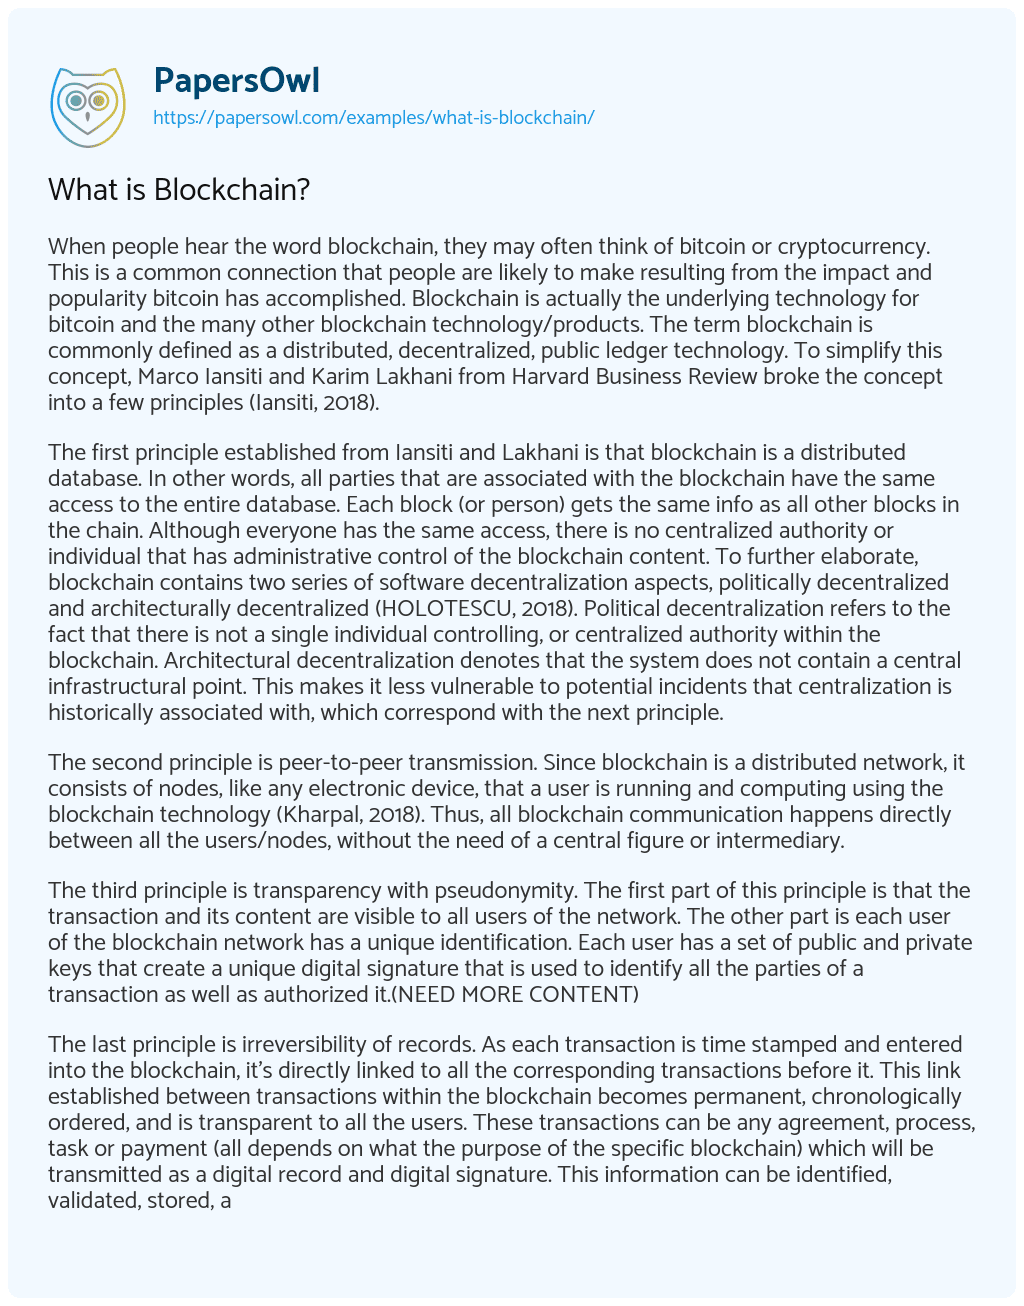 Essay on What is Blockchain?